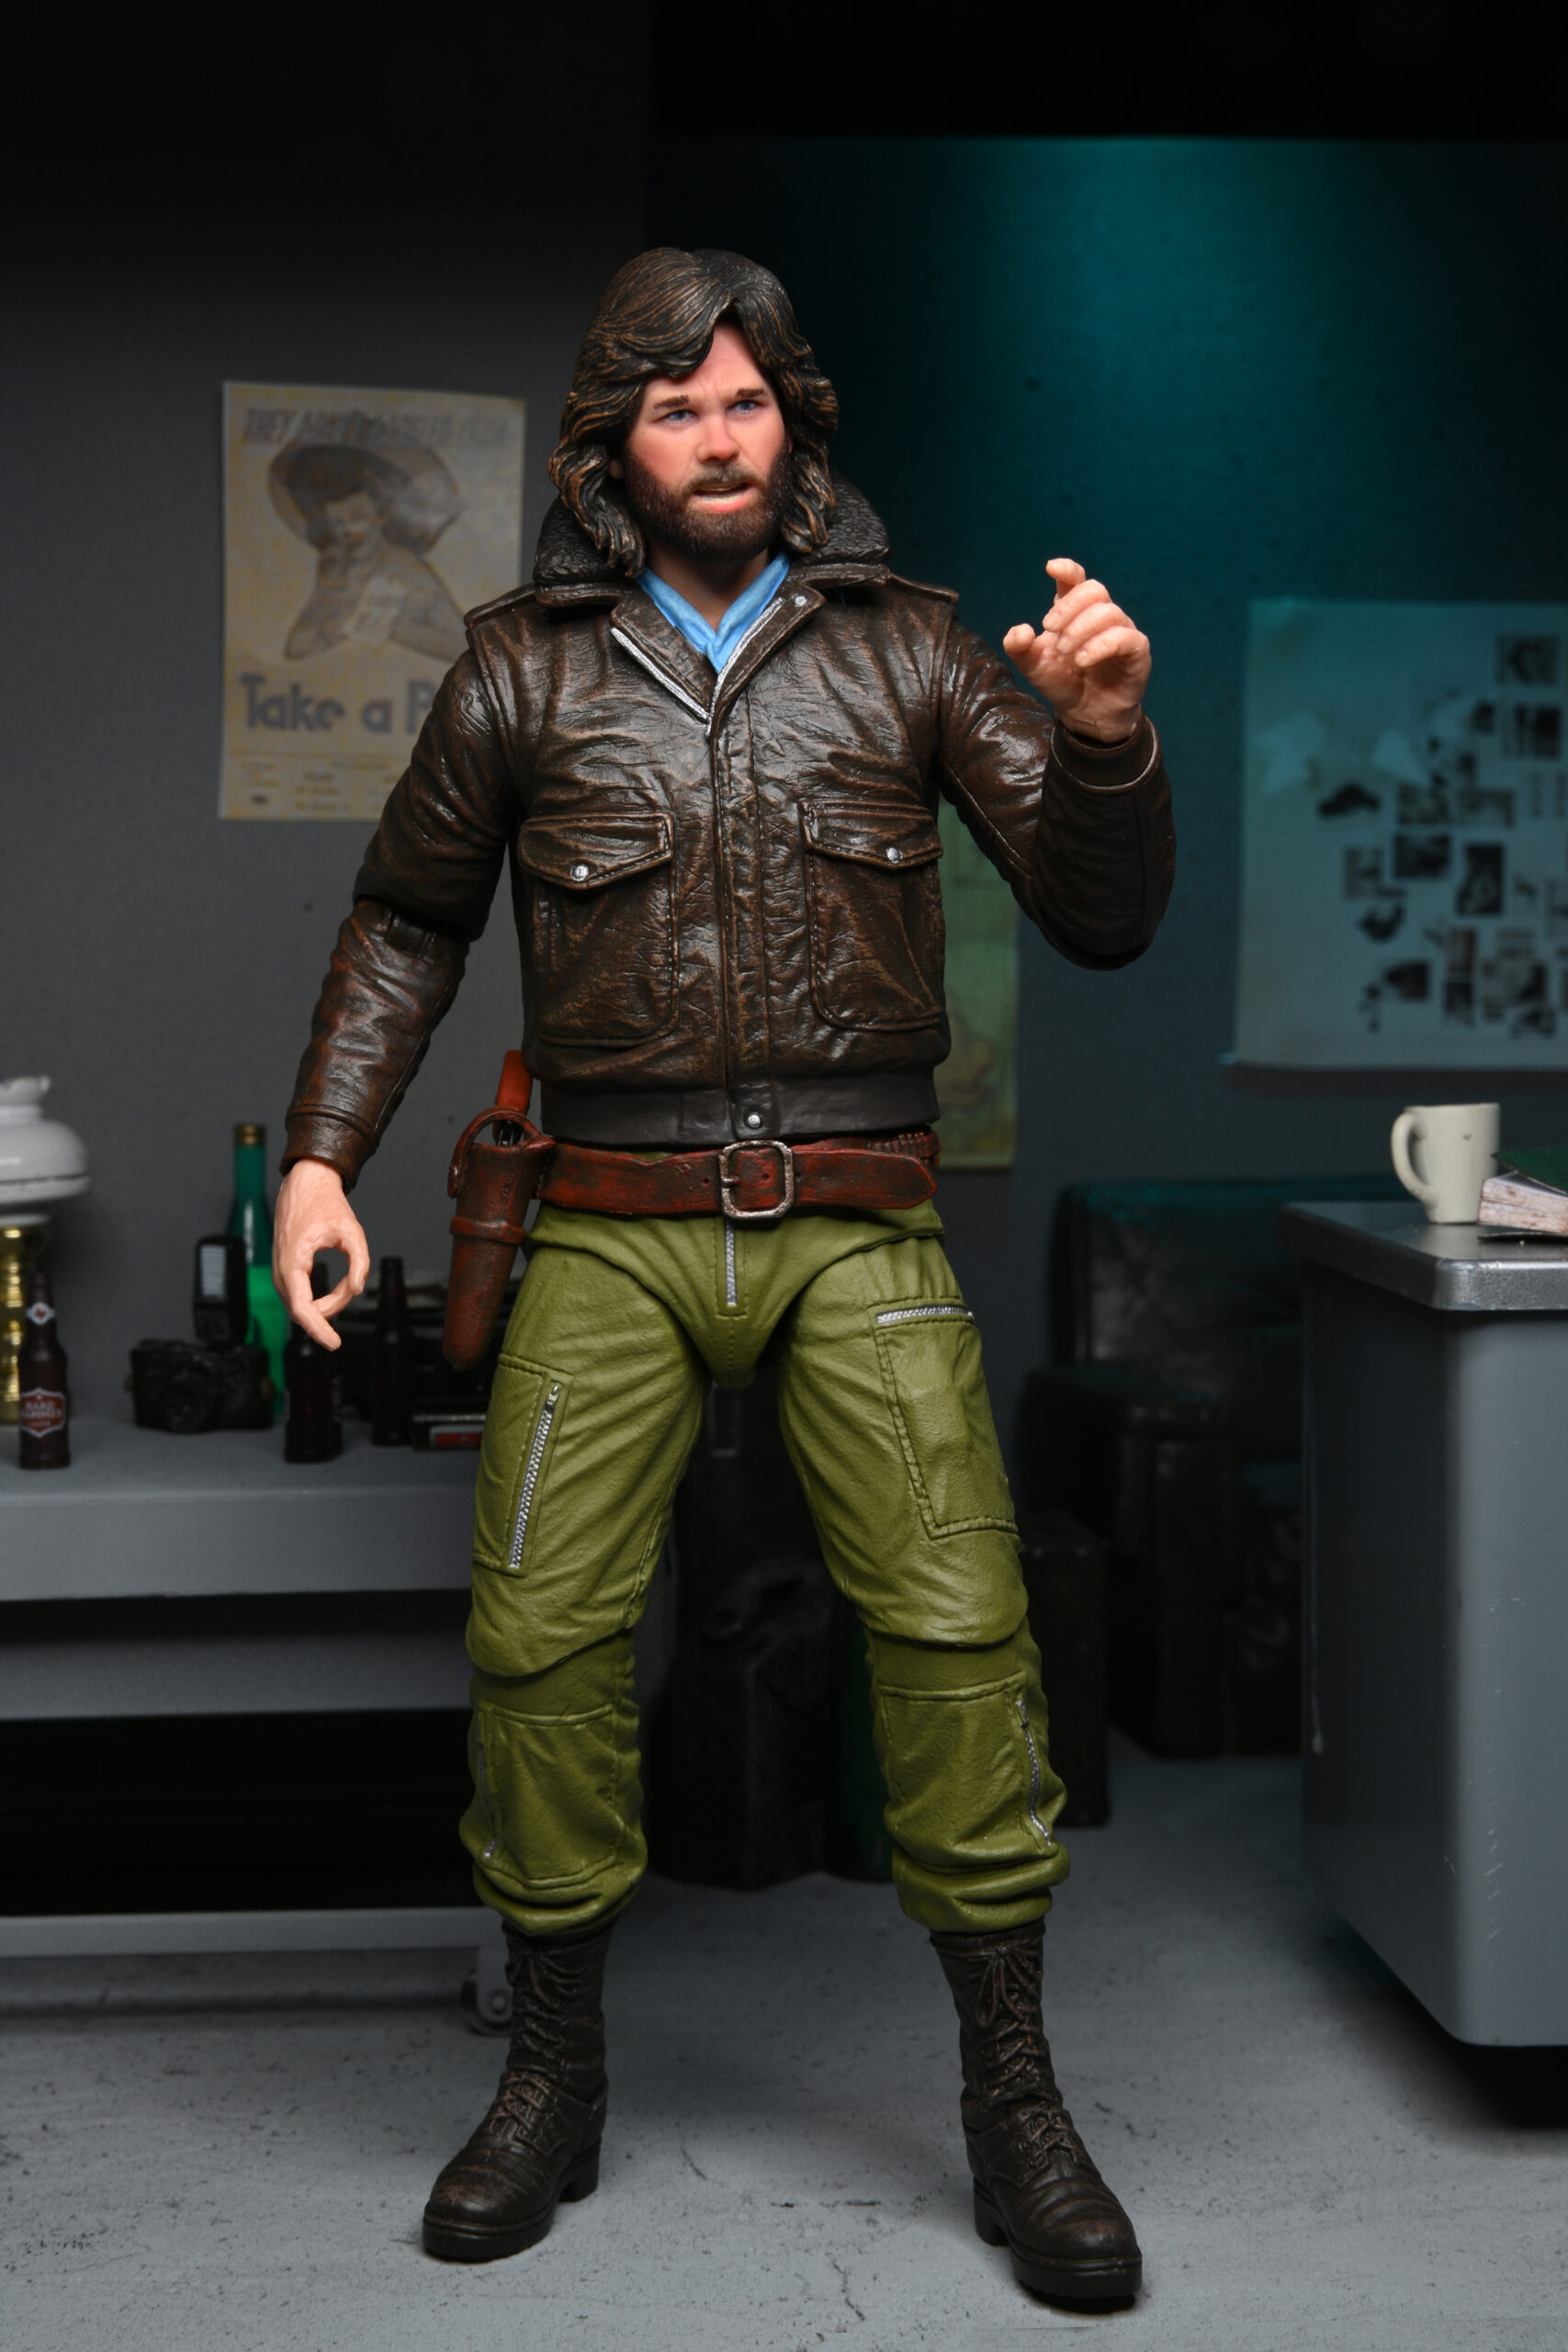 John Carpenter's The Thing Action Figures